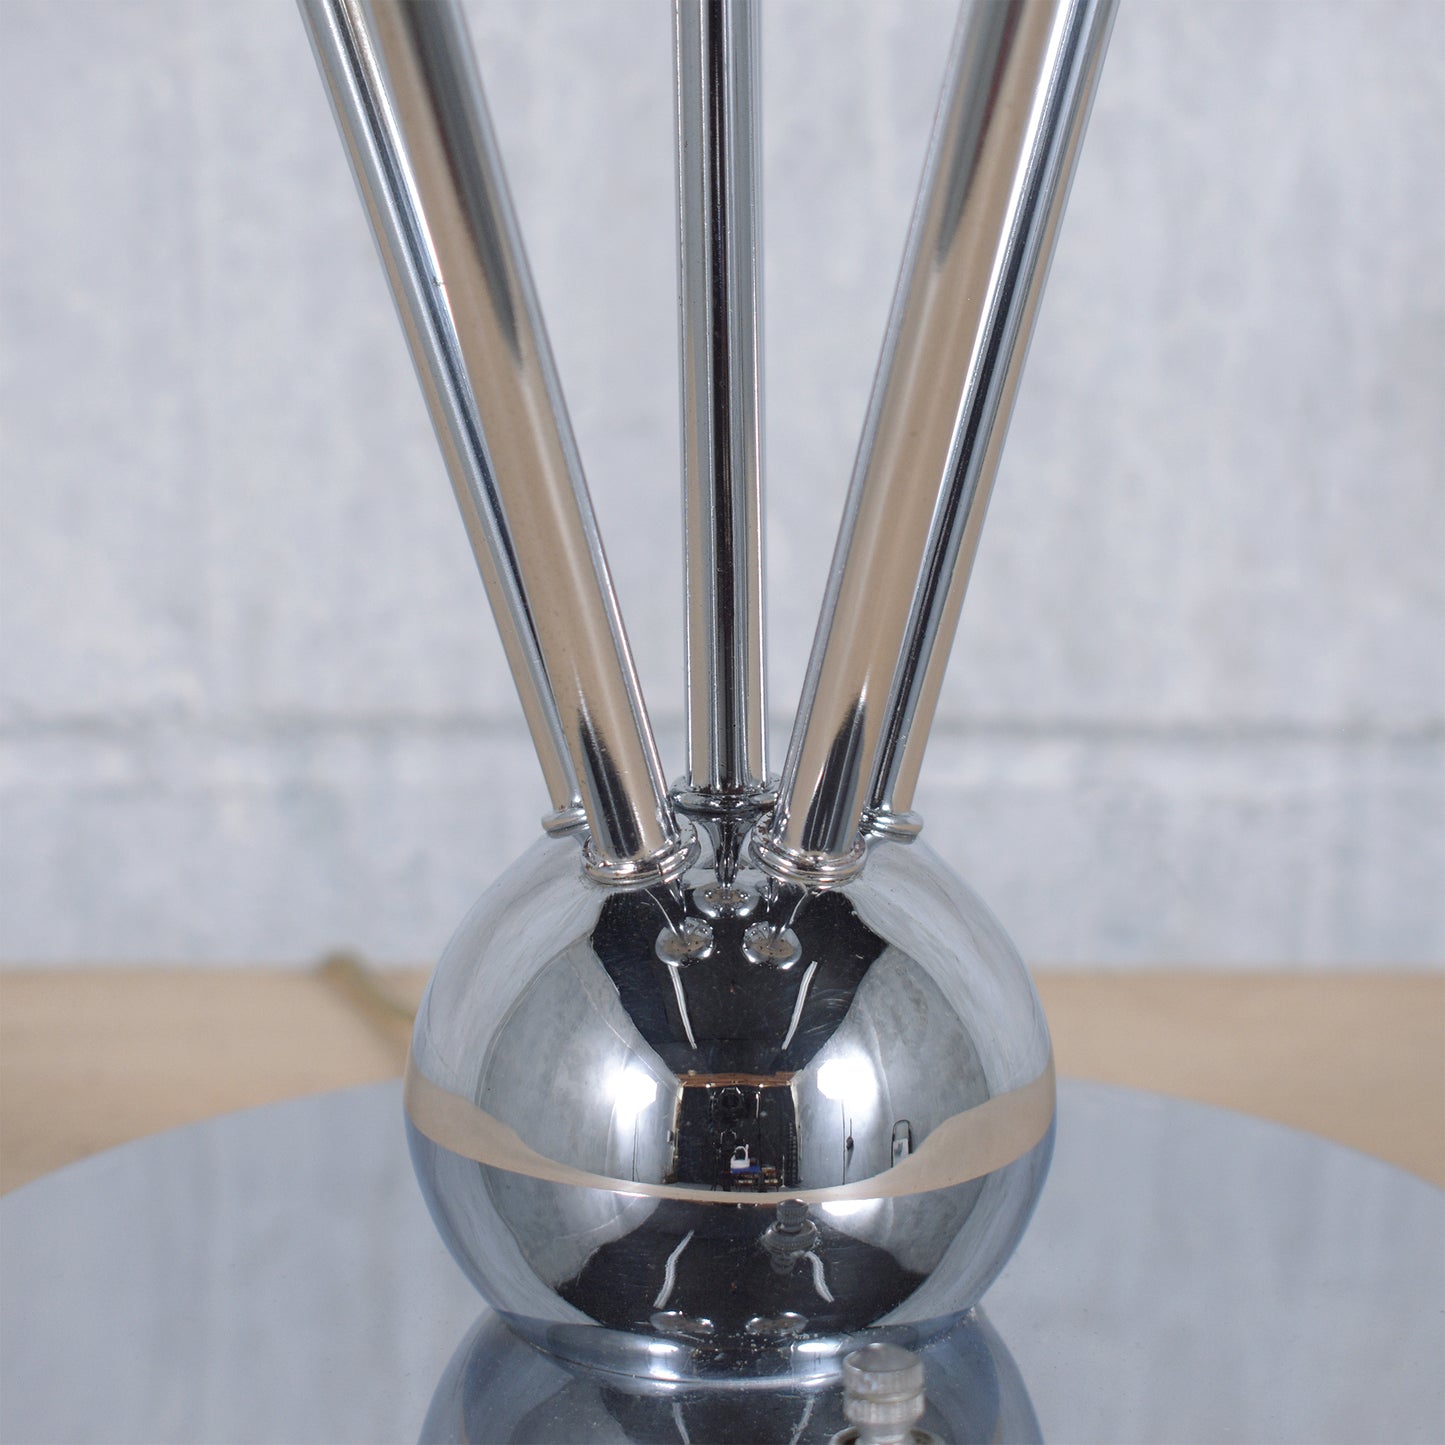 1960s Mid-Century Modern Chrome Table Lamp: Space Age Design Restored